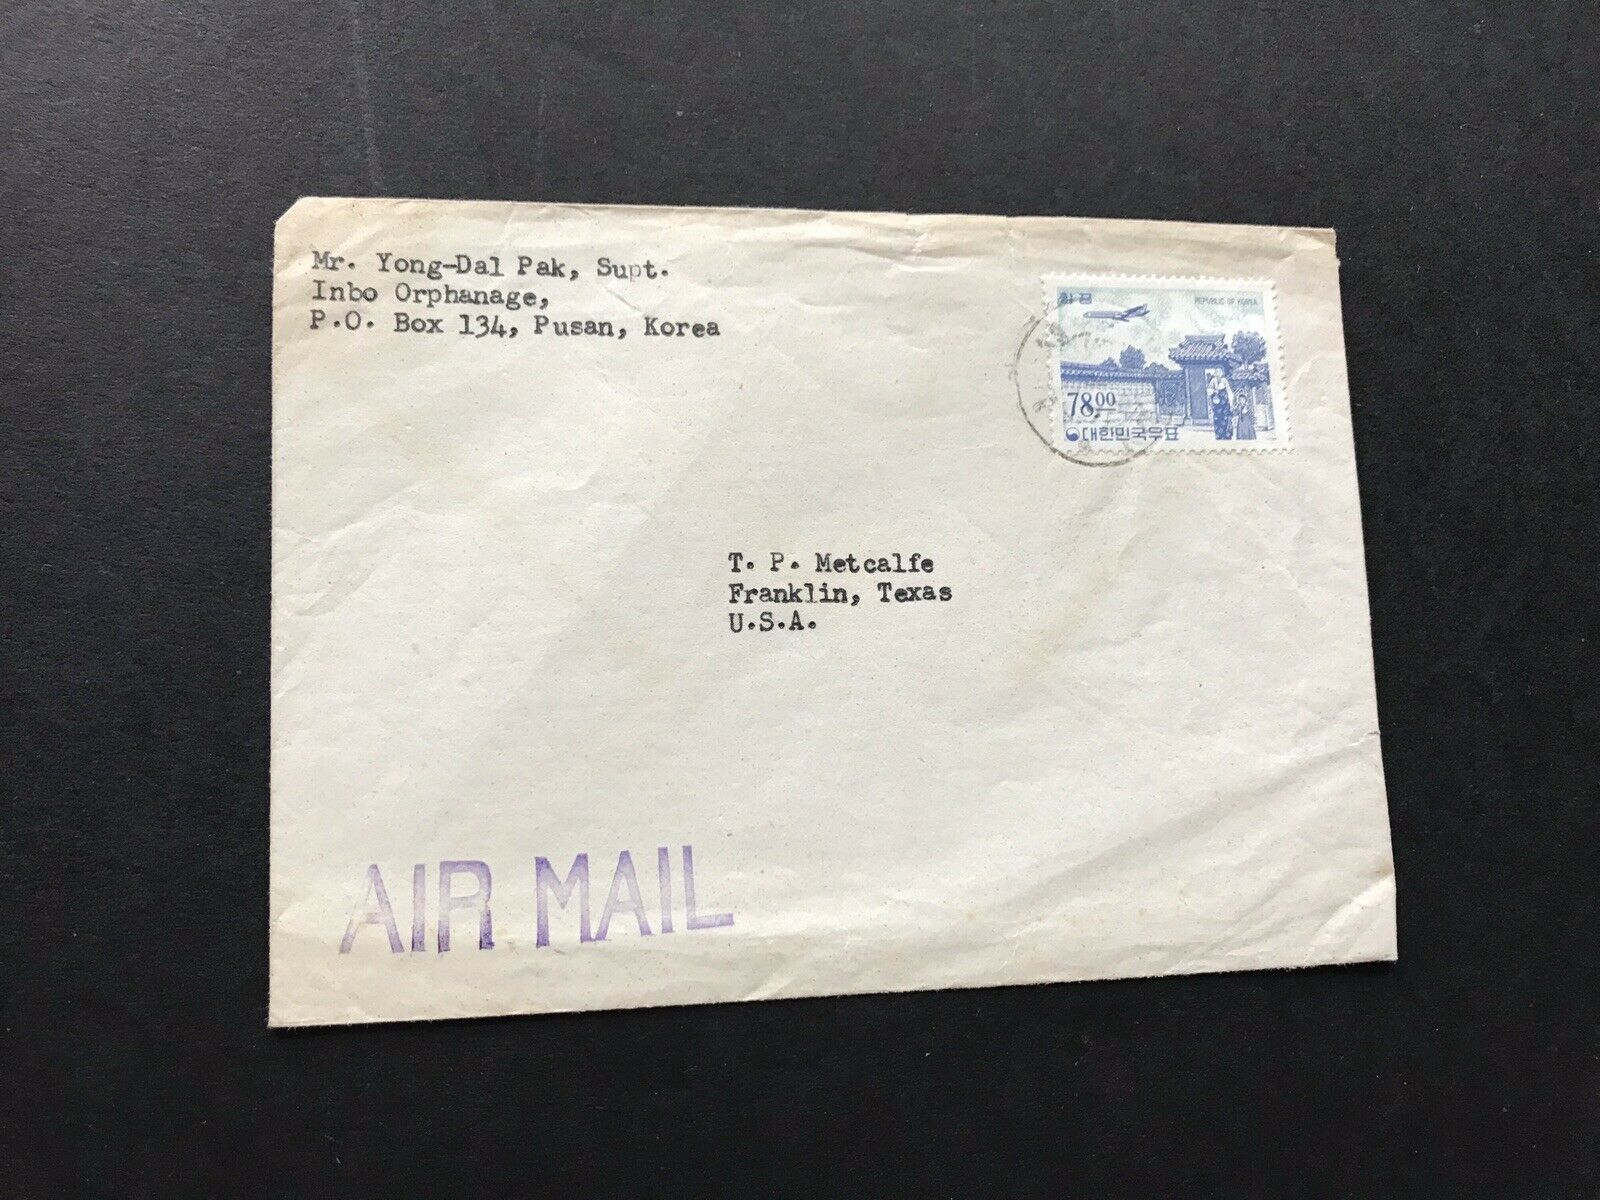 Korea 1965 Cover To Us + Solo Franking Airmail #c37 + 78-won Rate +neat Cover